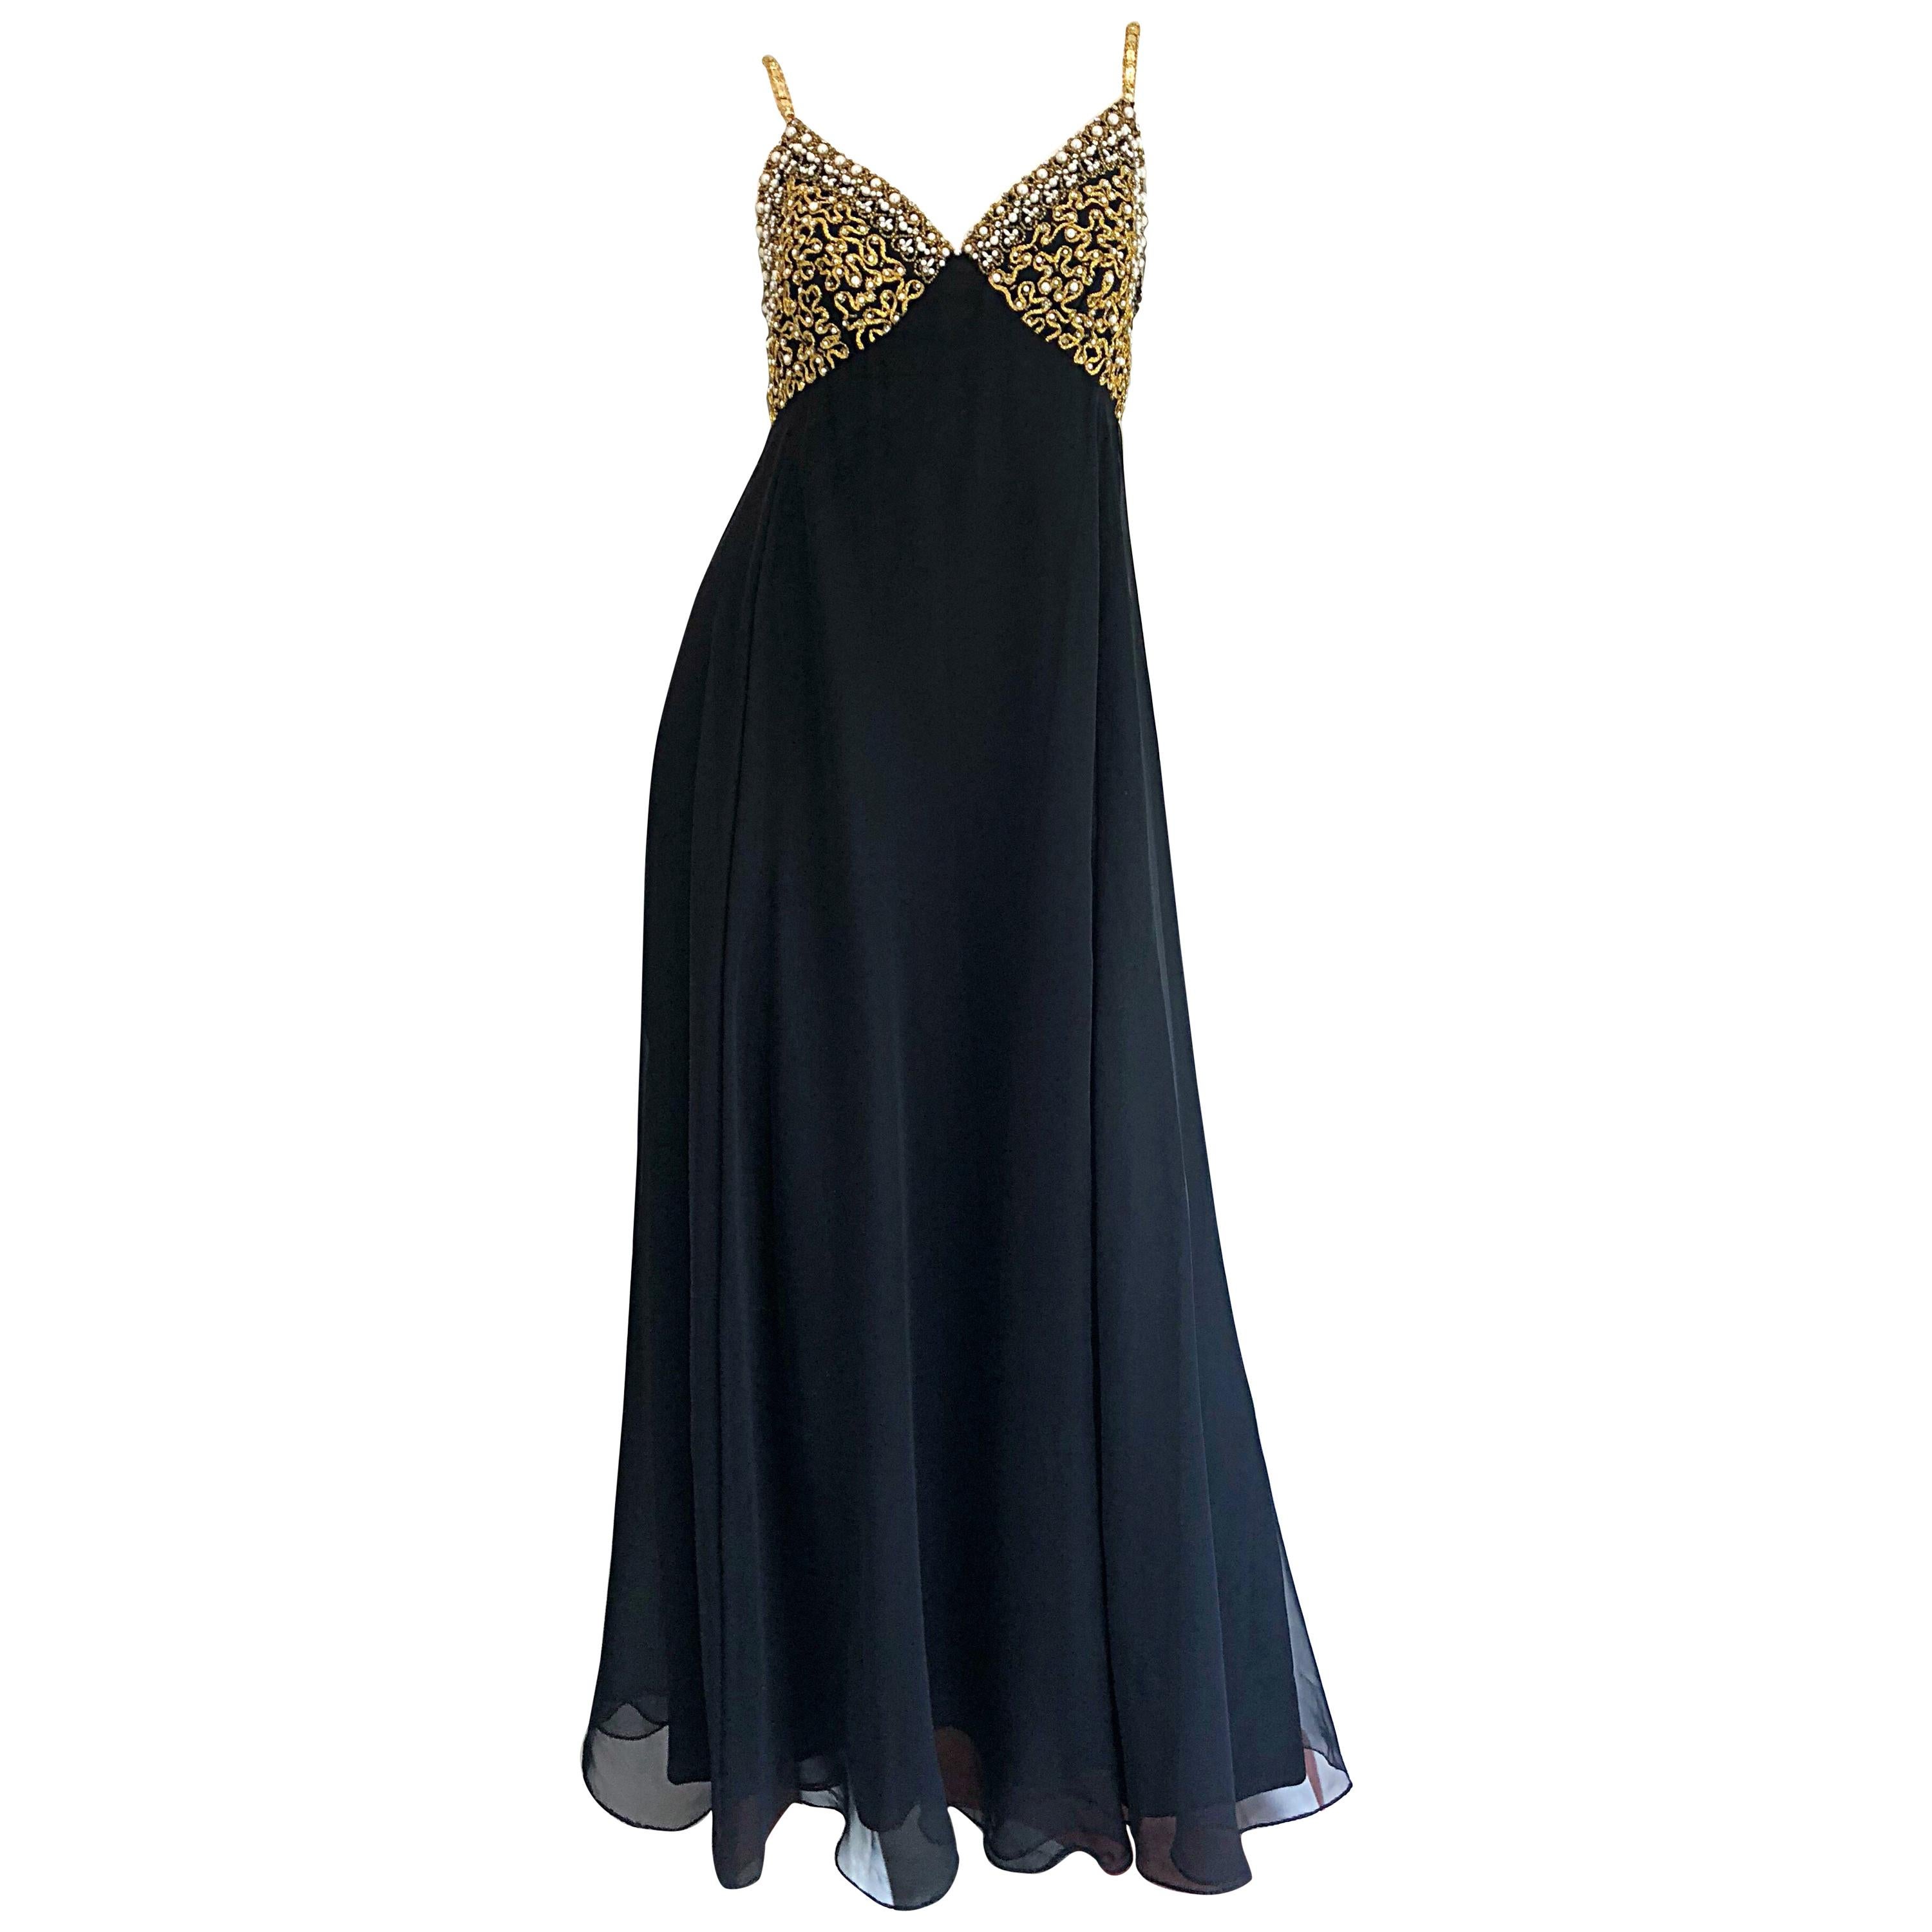 1970s Black + Gold Pearl + Rhinestone Encrusted Vintage 70s Chiffon Evening Gown For Sale